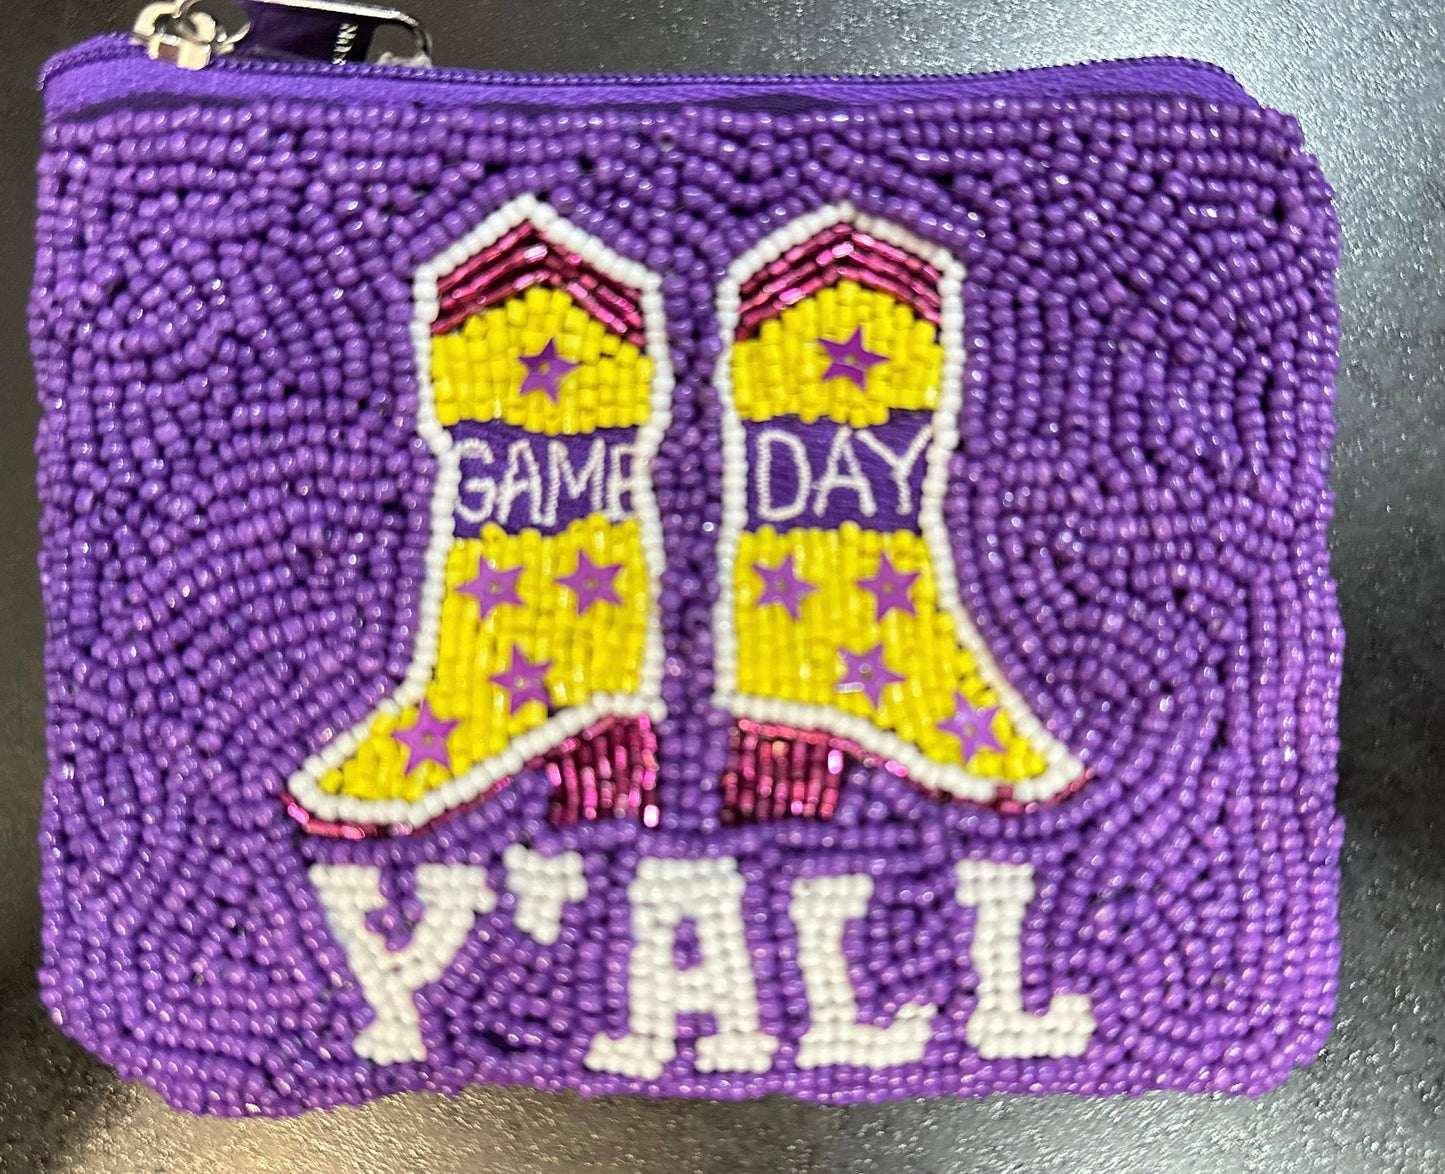 A Beaded Coin Purse - Purple and Gold - Game Day Y'all Boots by Misc Accessories with the words "game day yall" on it.